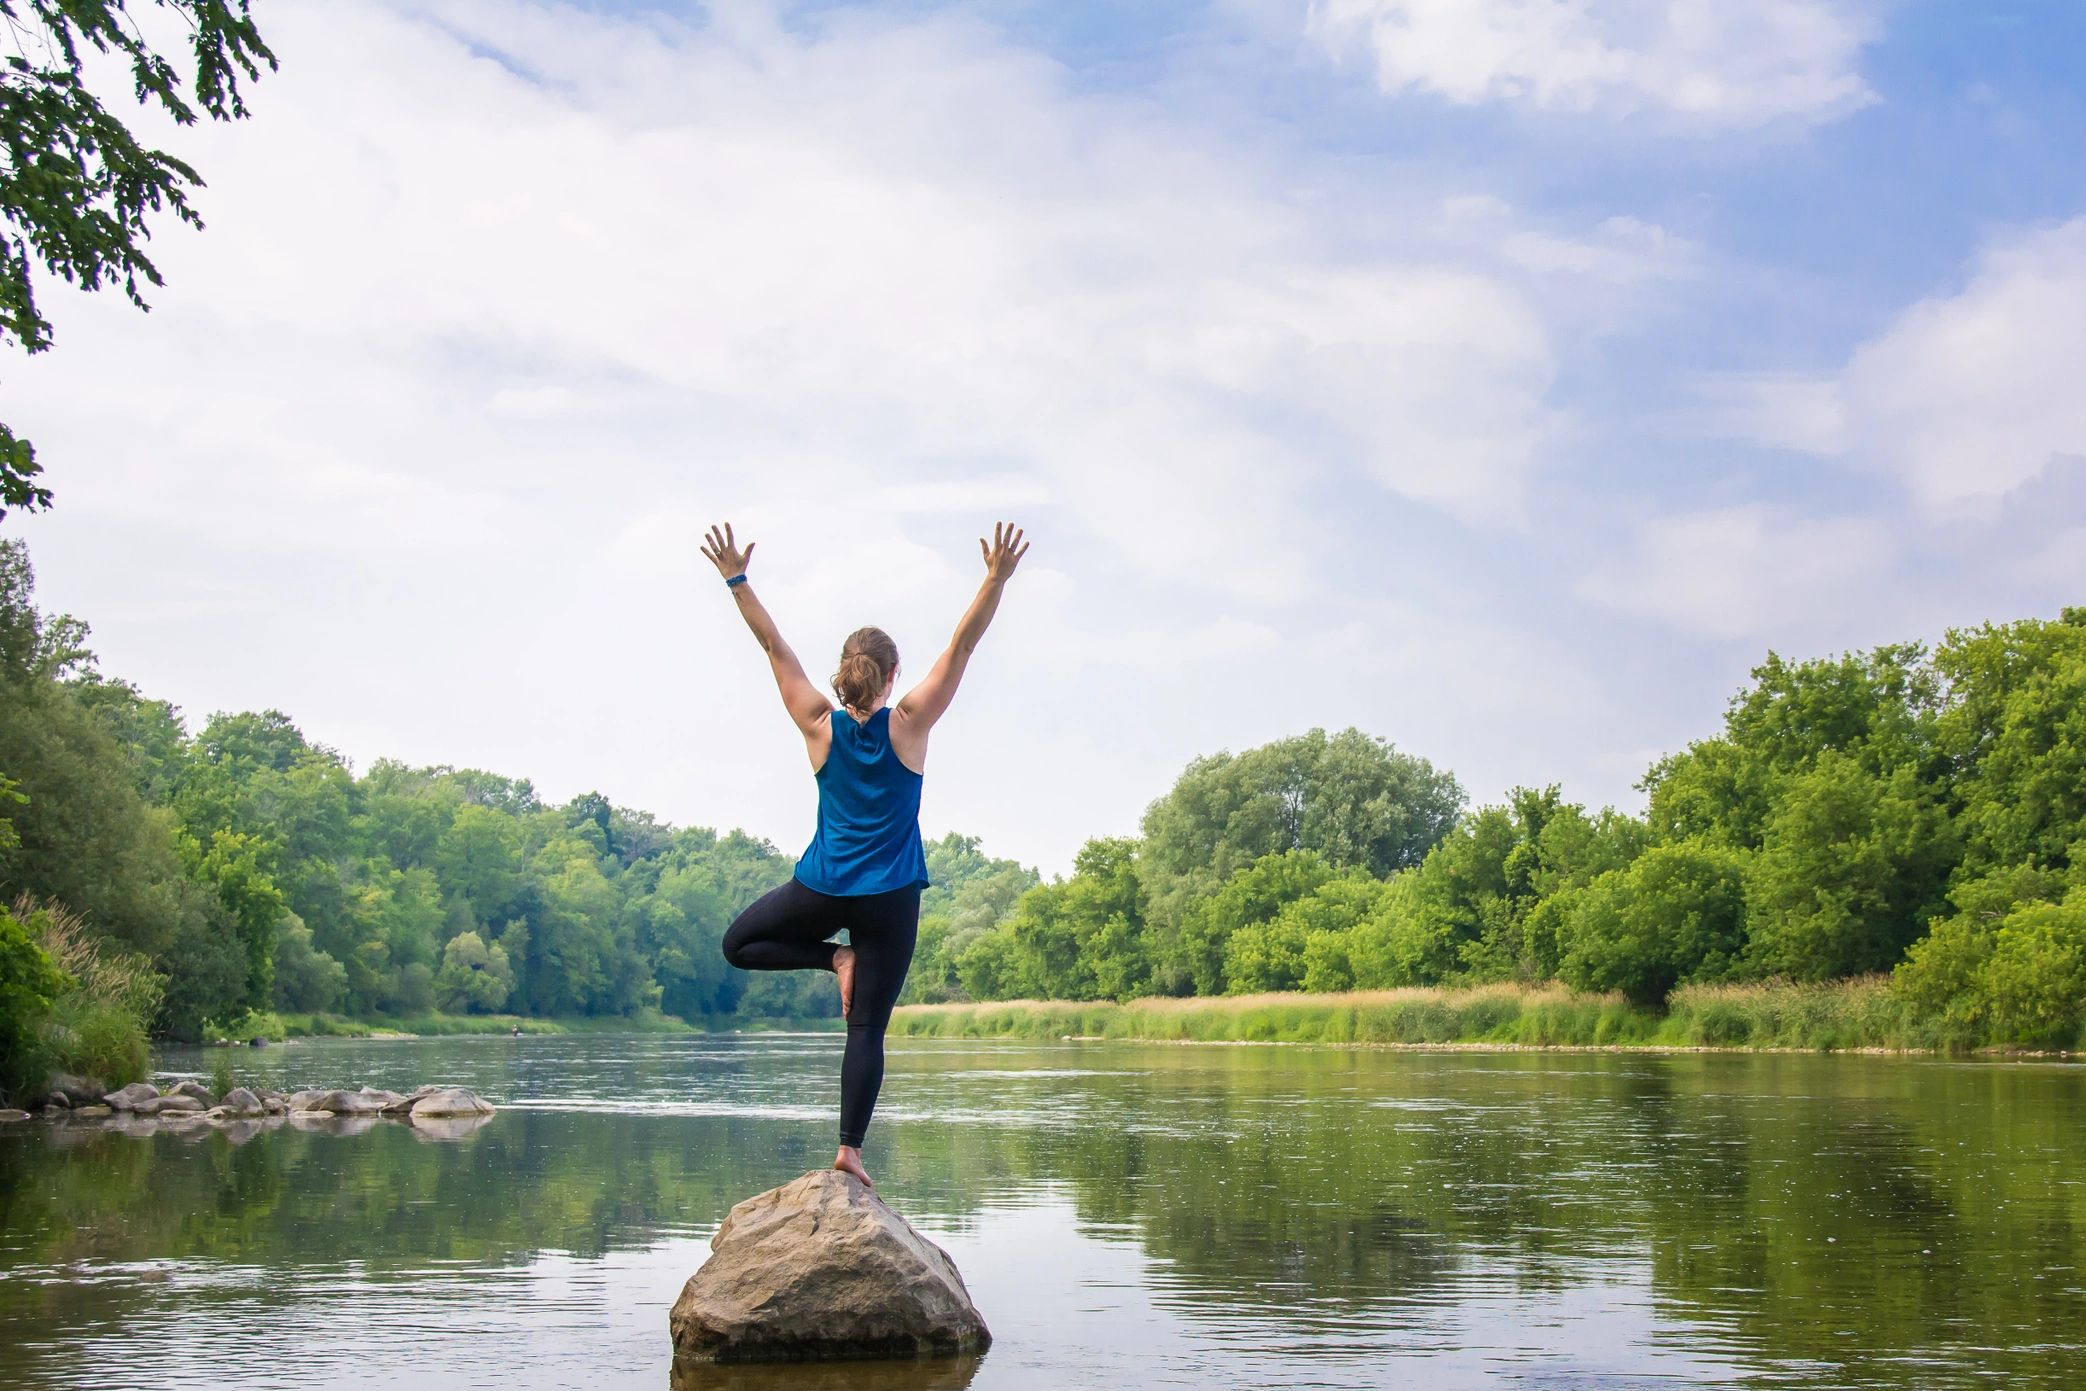 Waterloo Personal trainer and Yoga retreat teacher, Meagan is standing on a rock in a river.